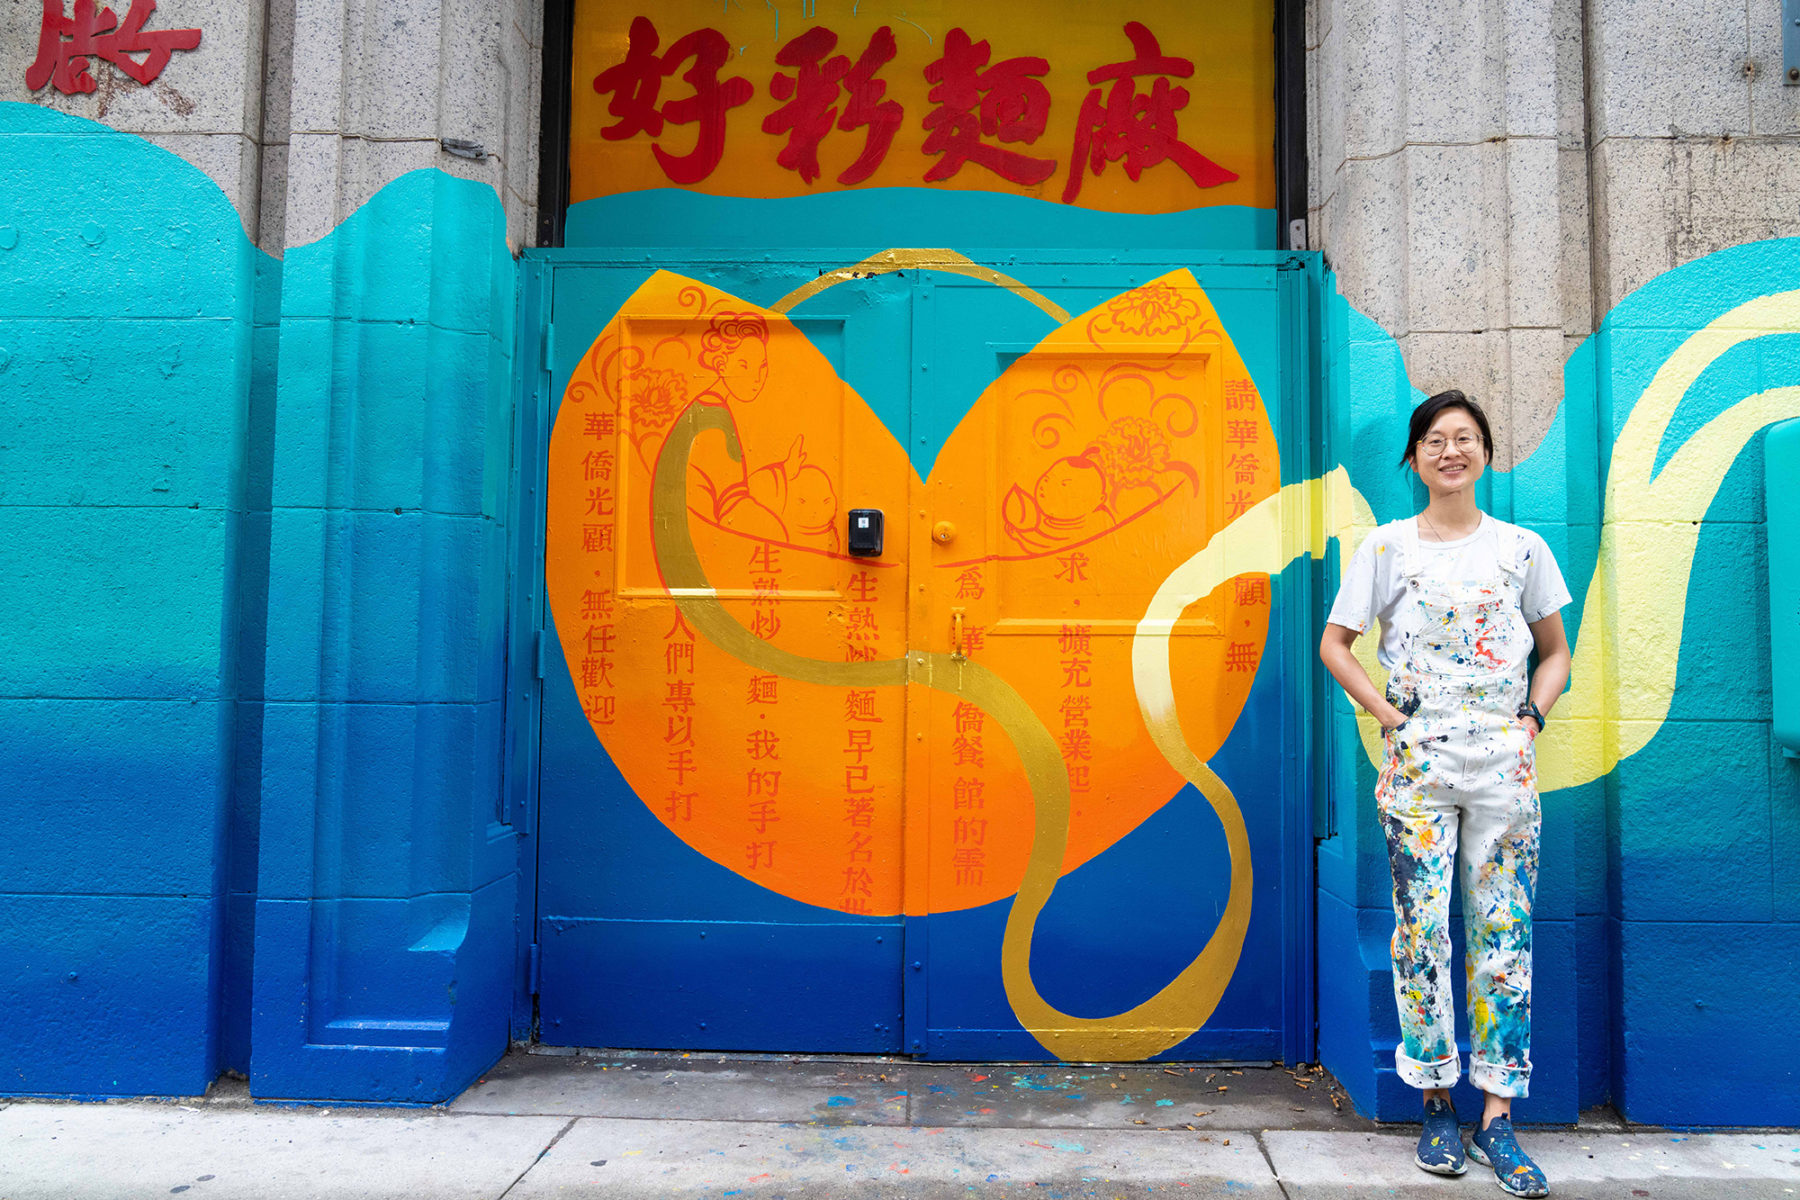 Artist stands by vibrant colored mural painted over doors